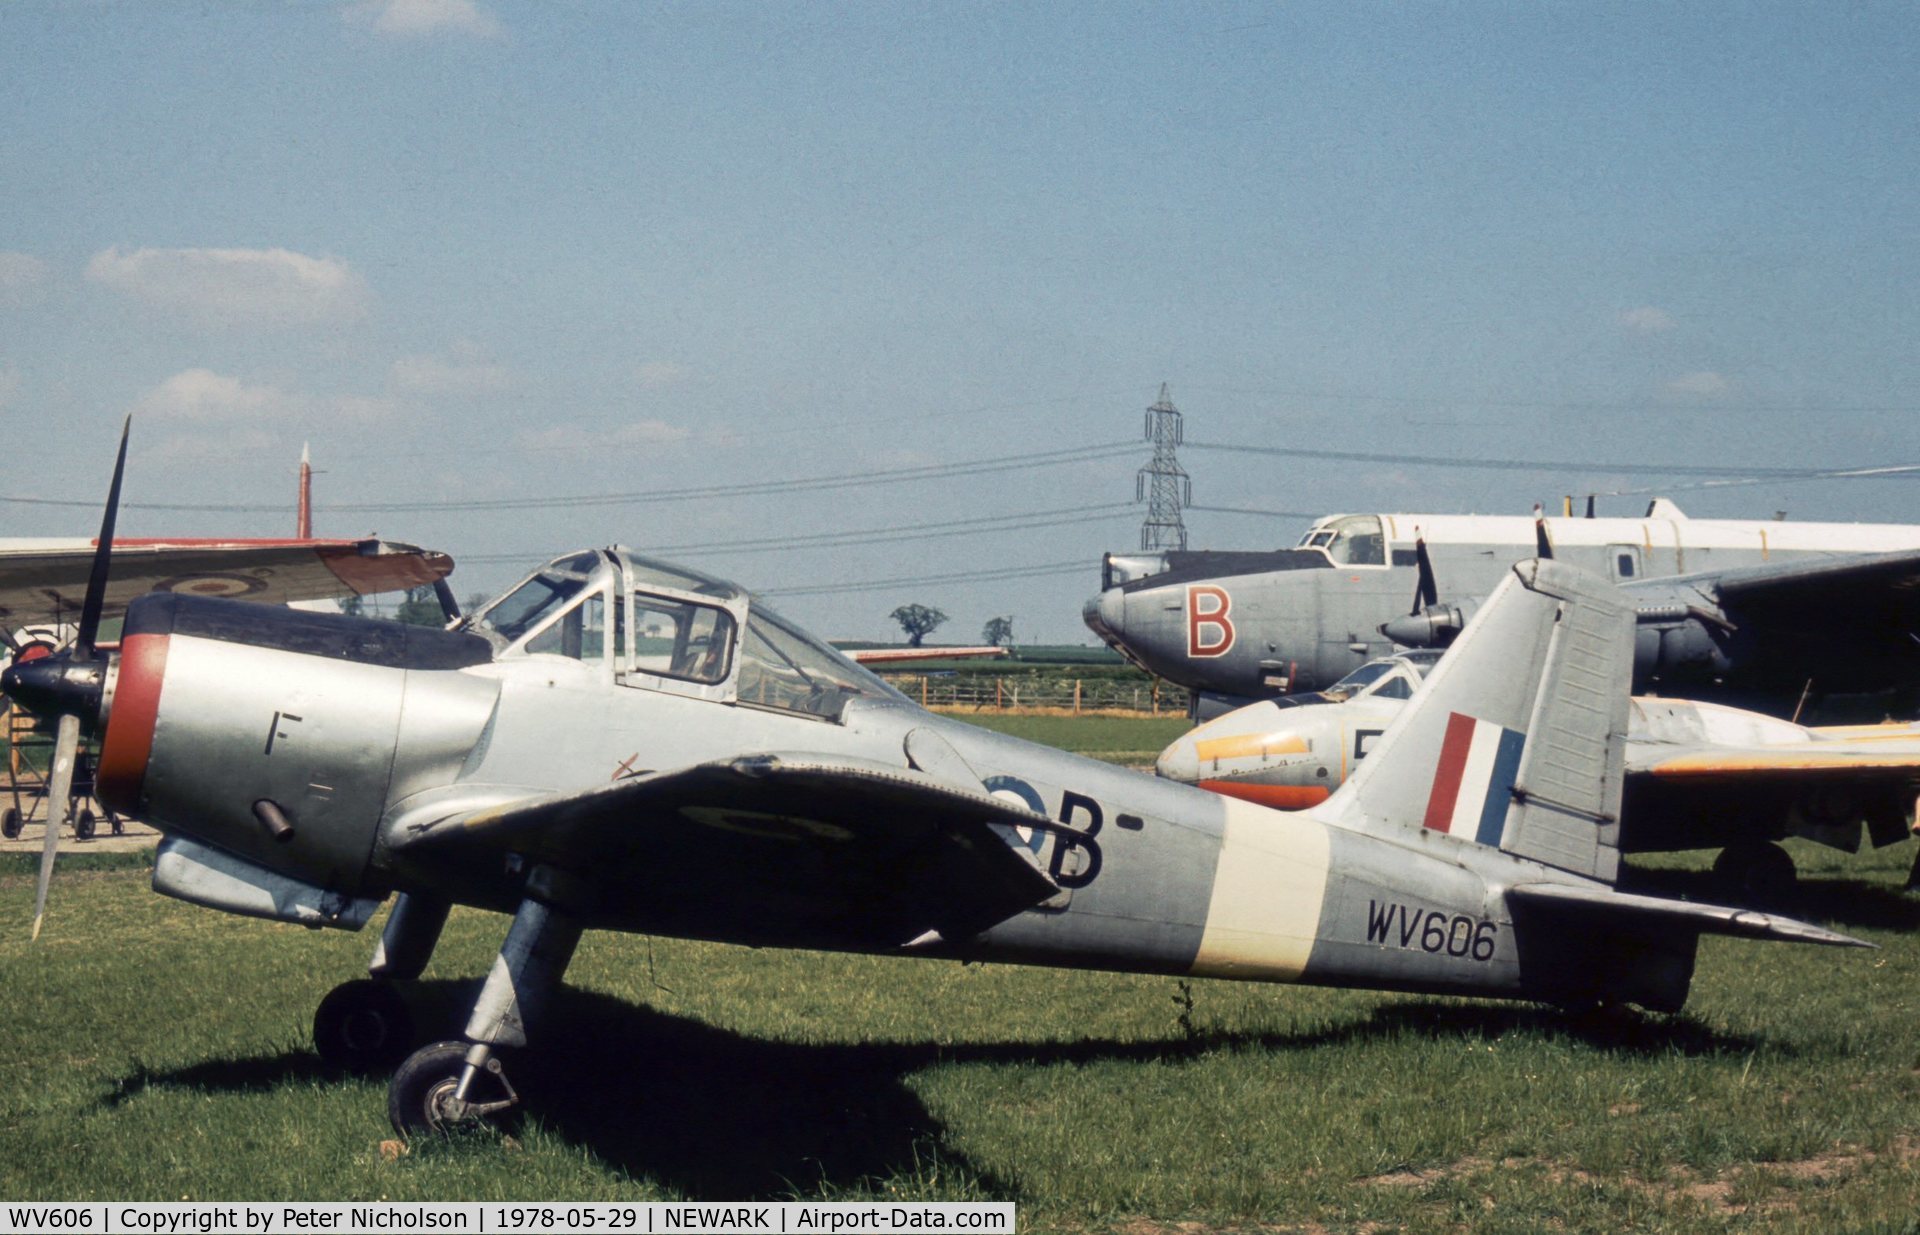 WV606, 1954 Percival P-56 Provost T.1 C/N PAC/56/133, Provost T.1 of 1 Flying Training School as displayed at the Newark Air Museum in May 1978.